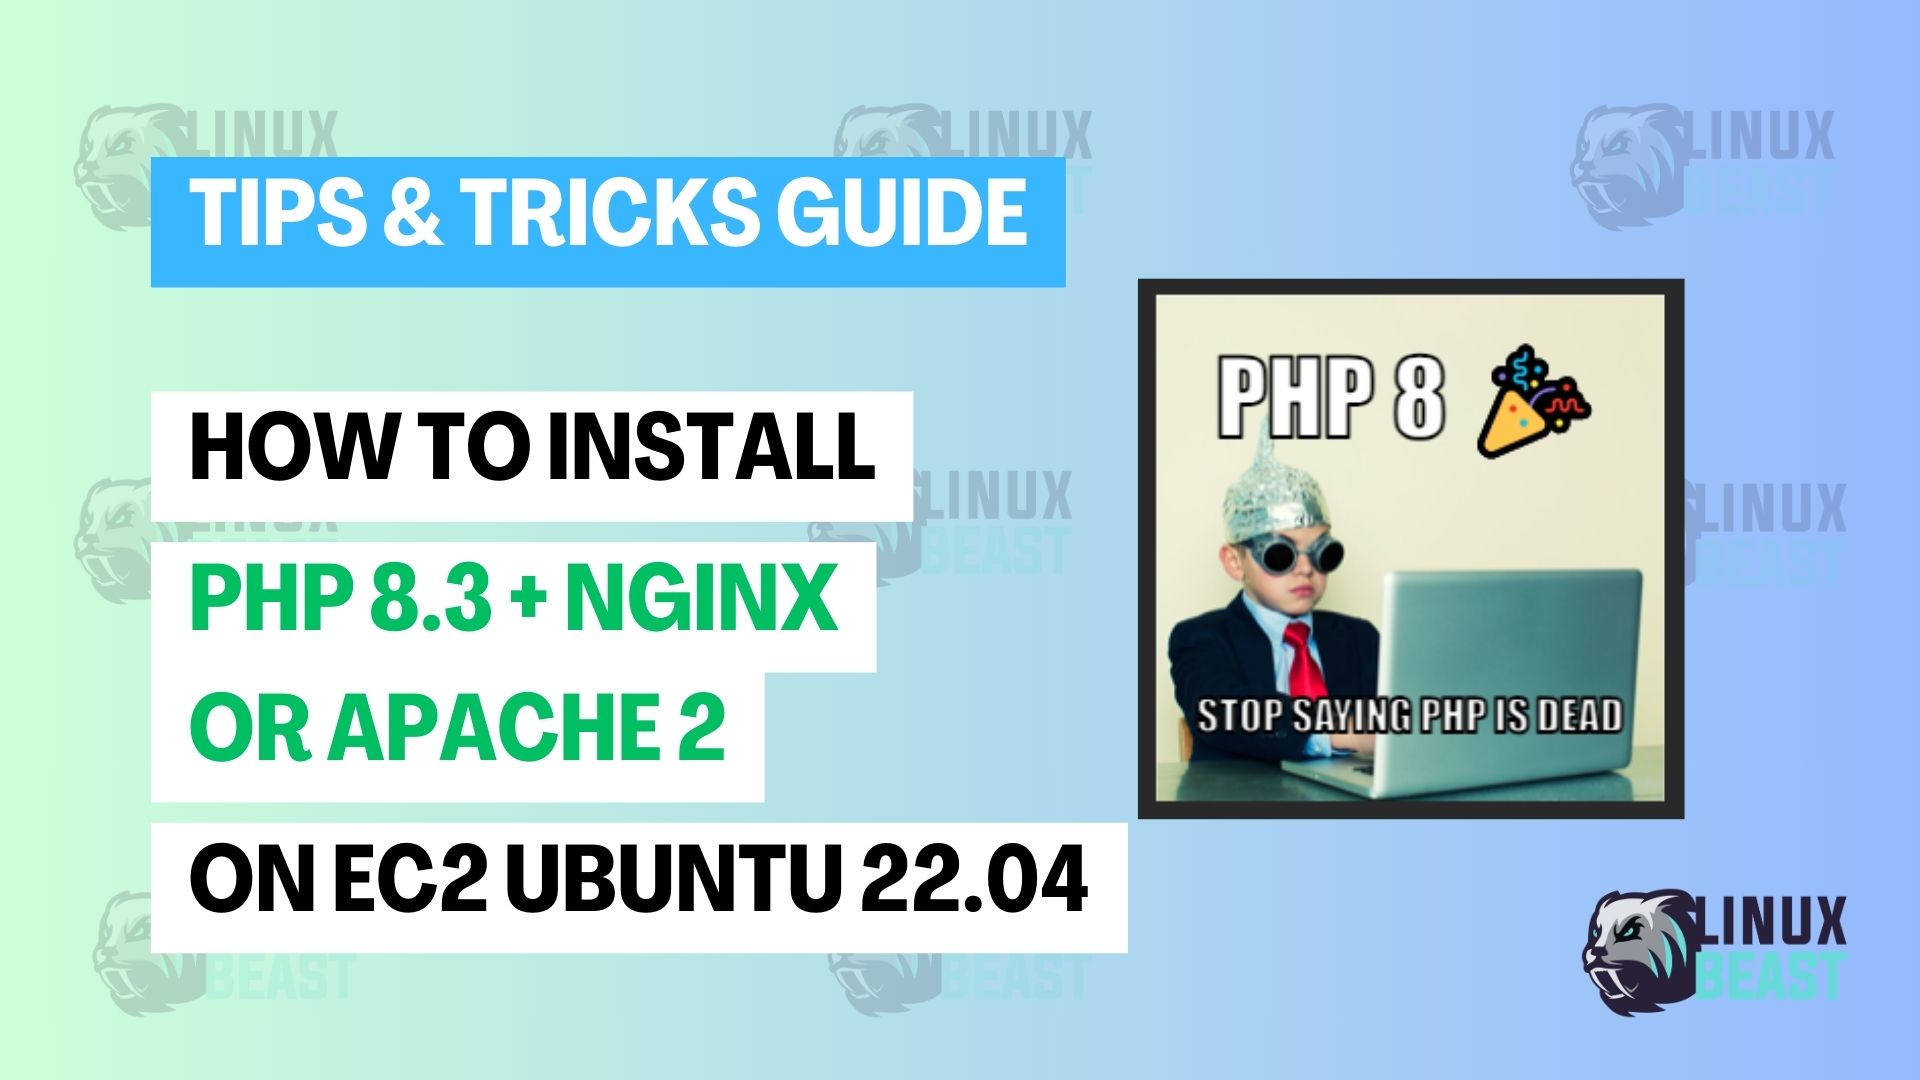 How to Install PHP 8.3 on an EC2 Ubuntu 22.04 LTS Instance